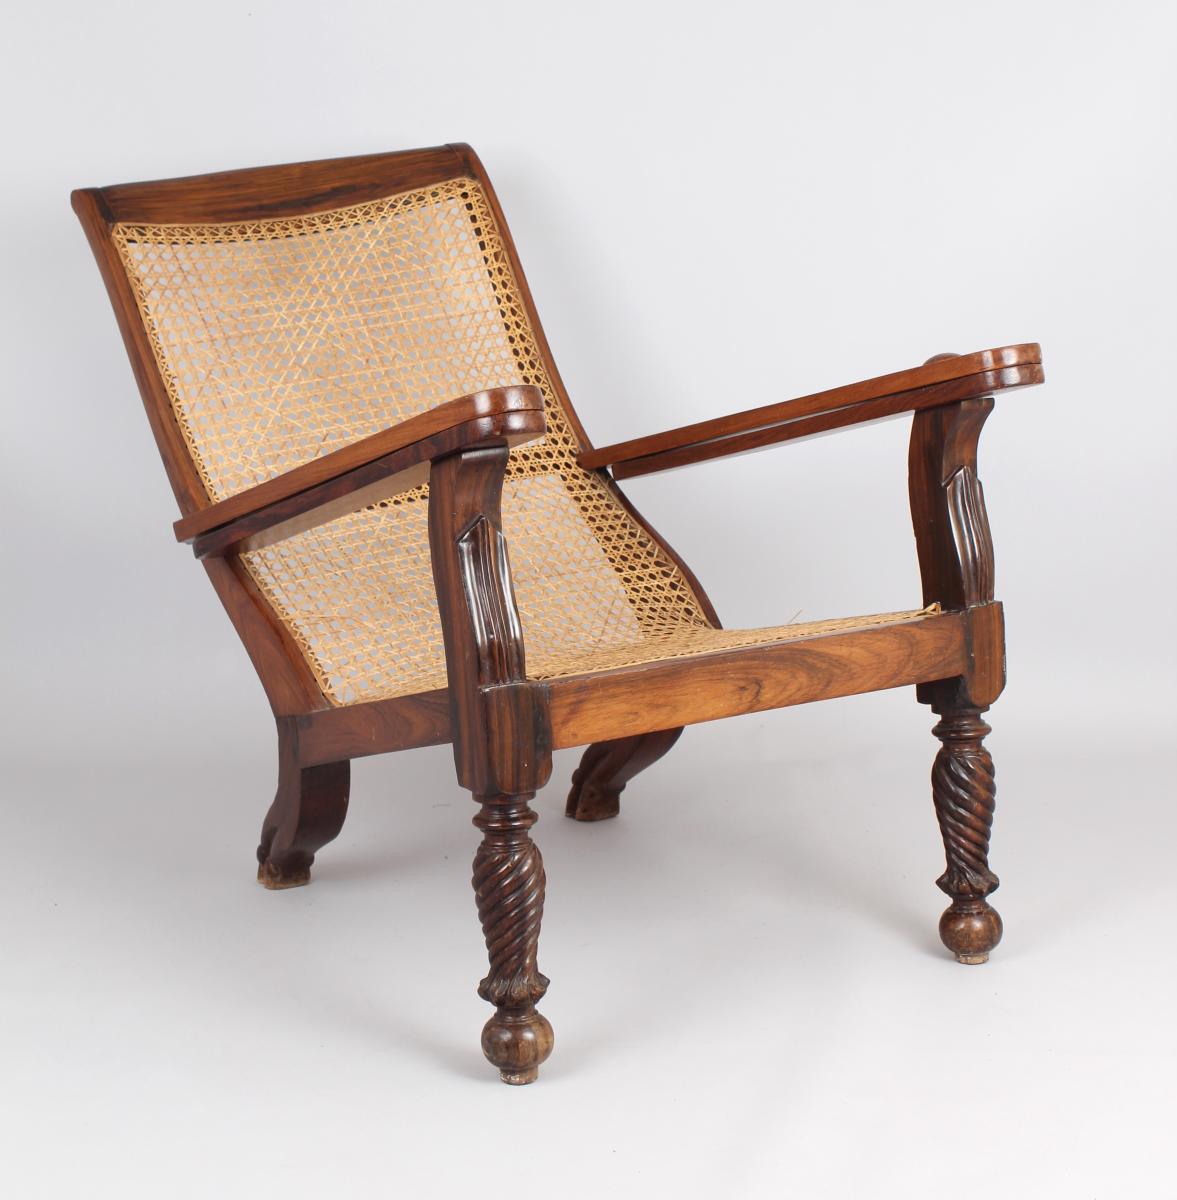 mid 19th century teak and cane Planter’s Chair